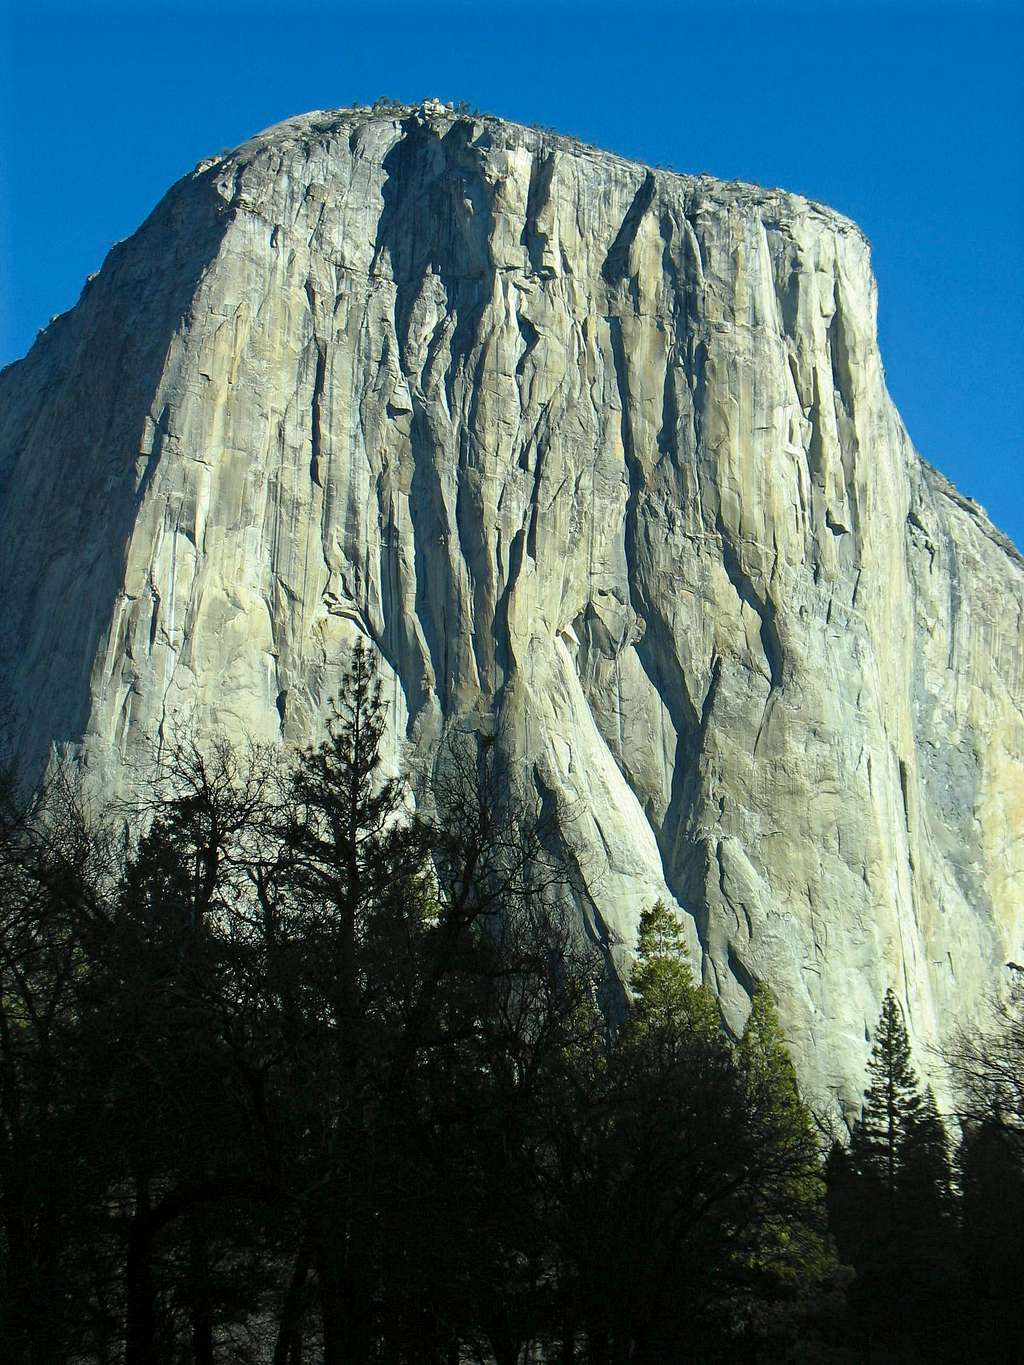 El Capitan from the southwest